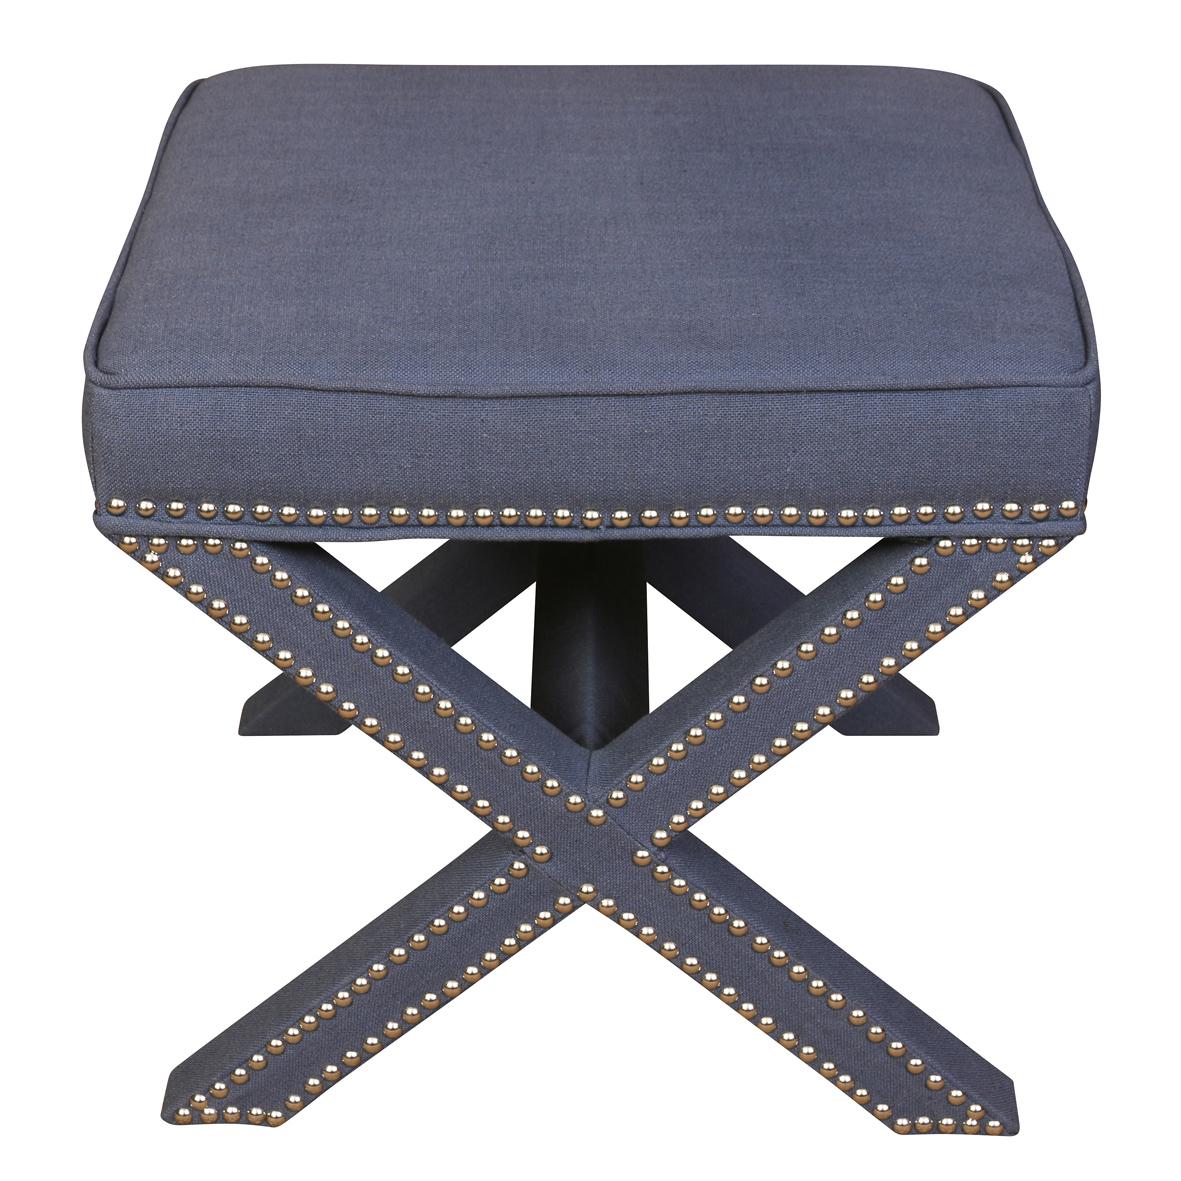 A pair of upholstered square benches in blue linen with nickel nail head detail and X shaped base